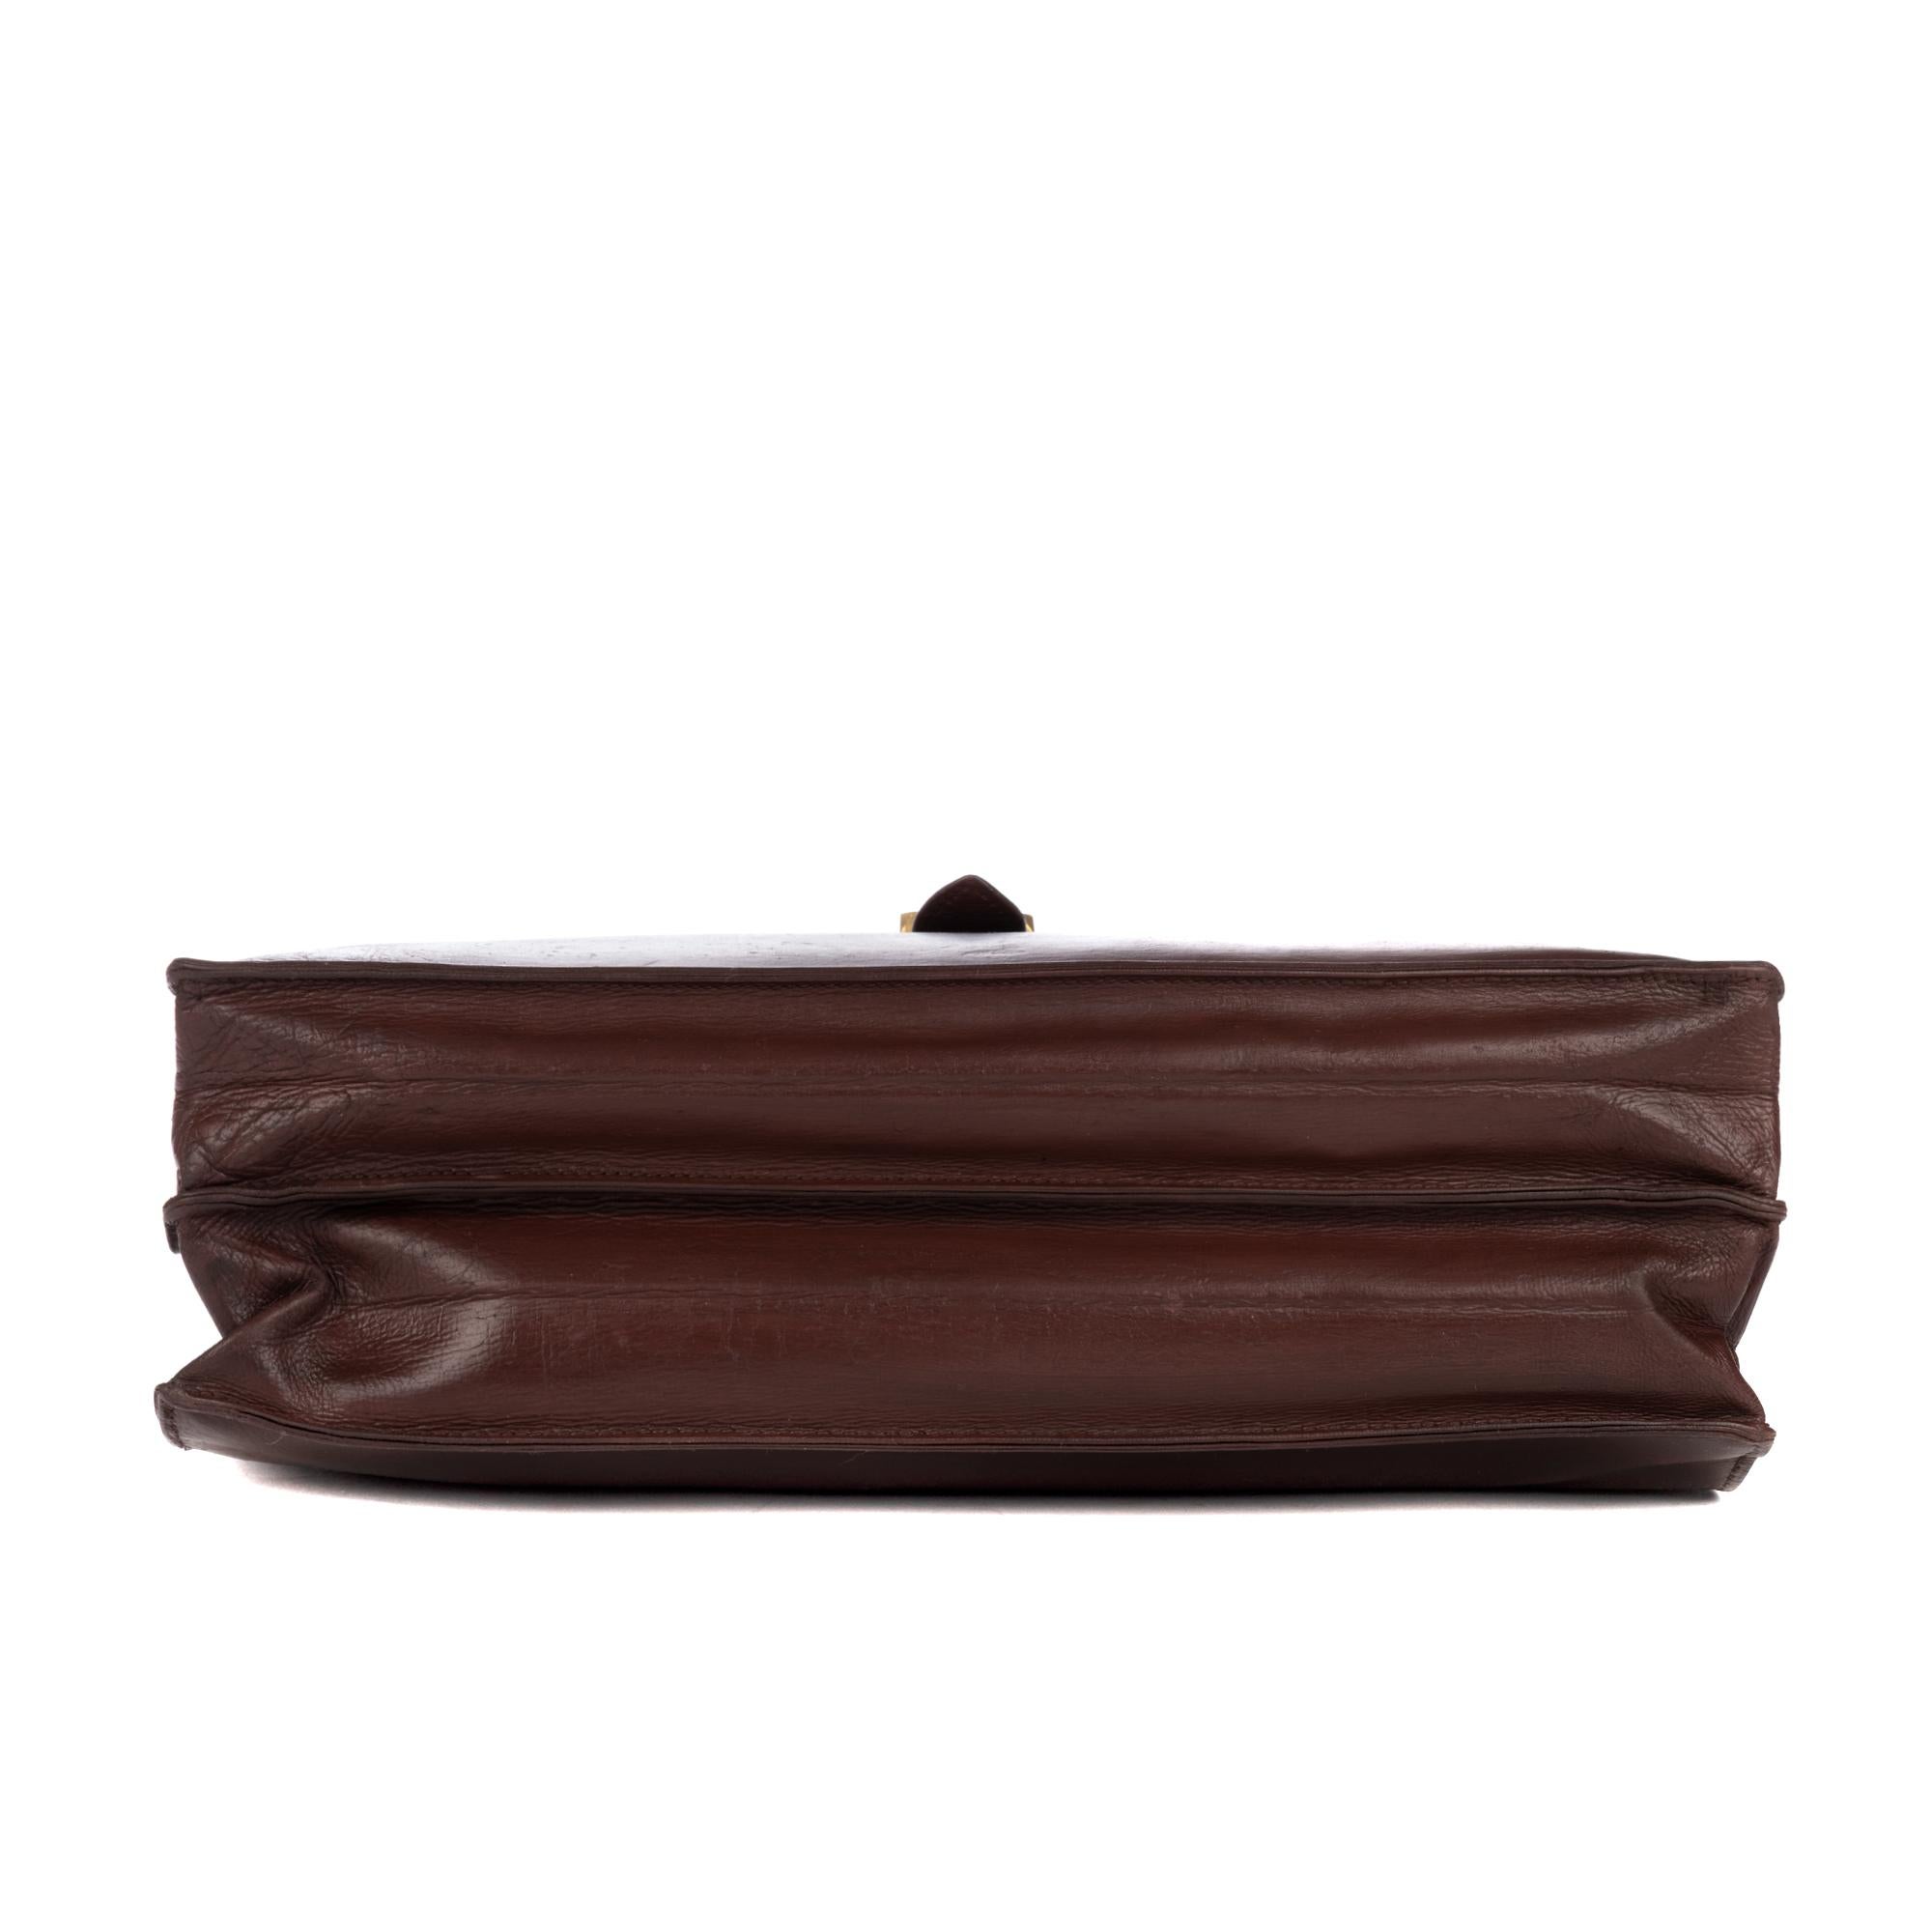 Hermes Brown Box Leather Briefcase 3